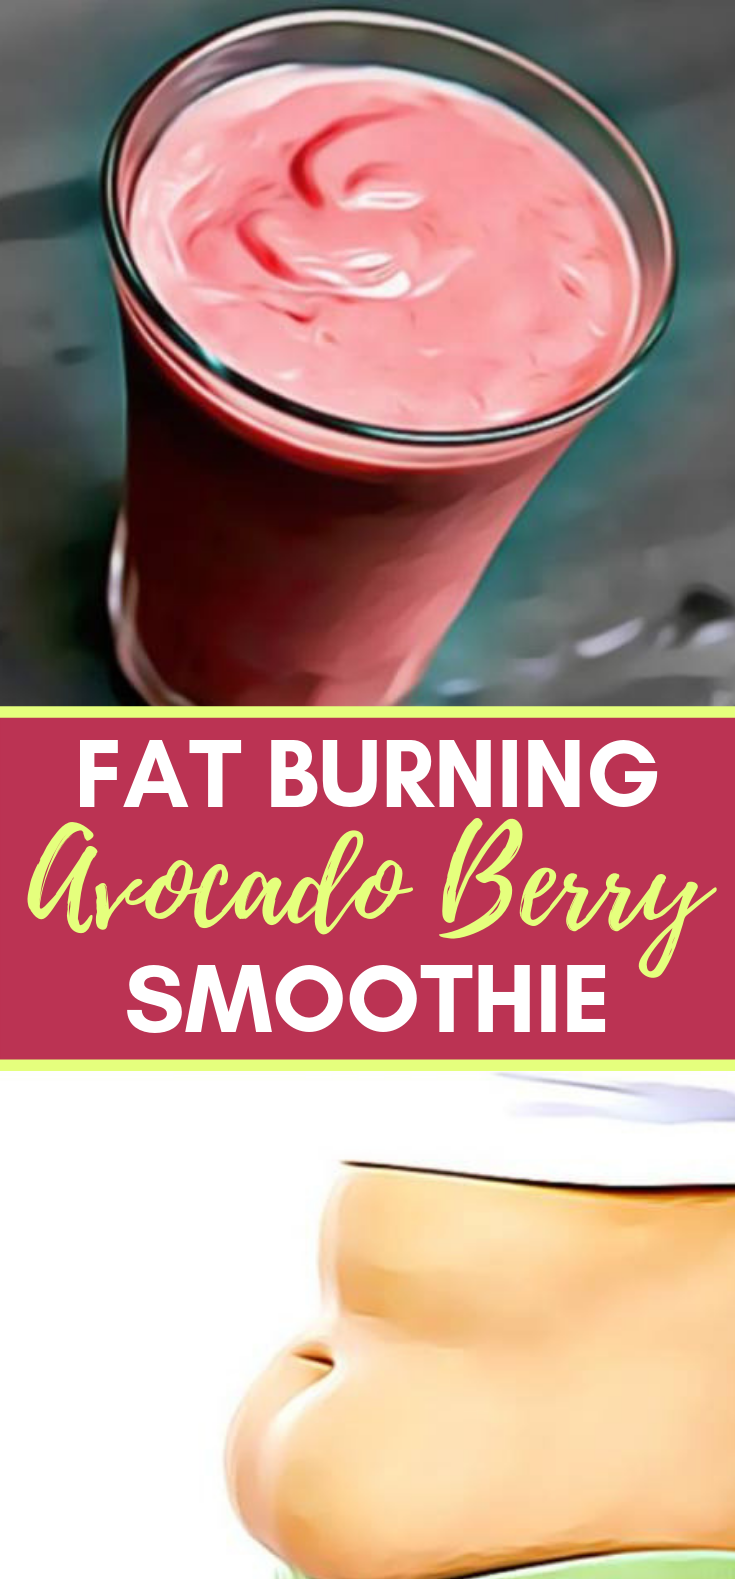 Fat Burning Avocado Berry Smoothie #healthydrink #diet